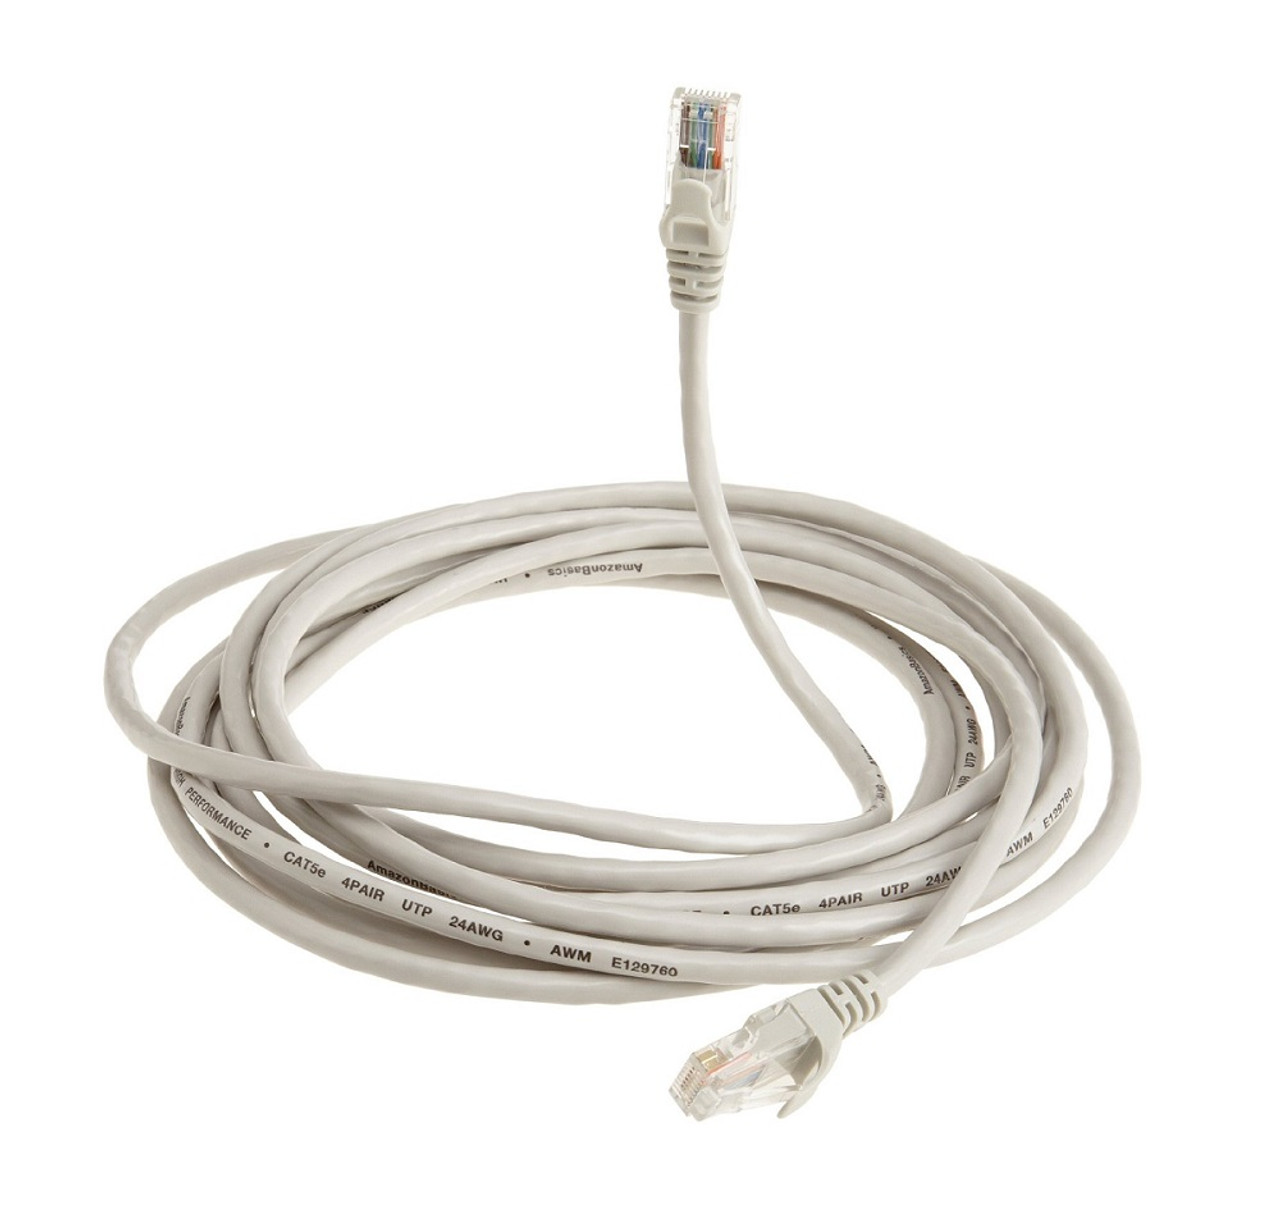 JD363B - HP X230 Local Connect 50cm Cx4 Network Cable